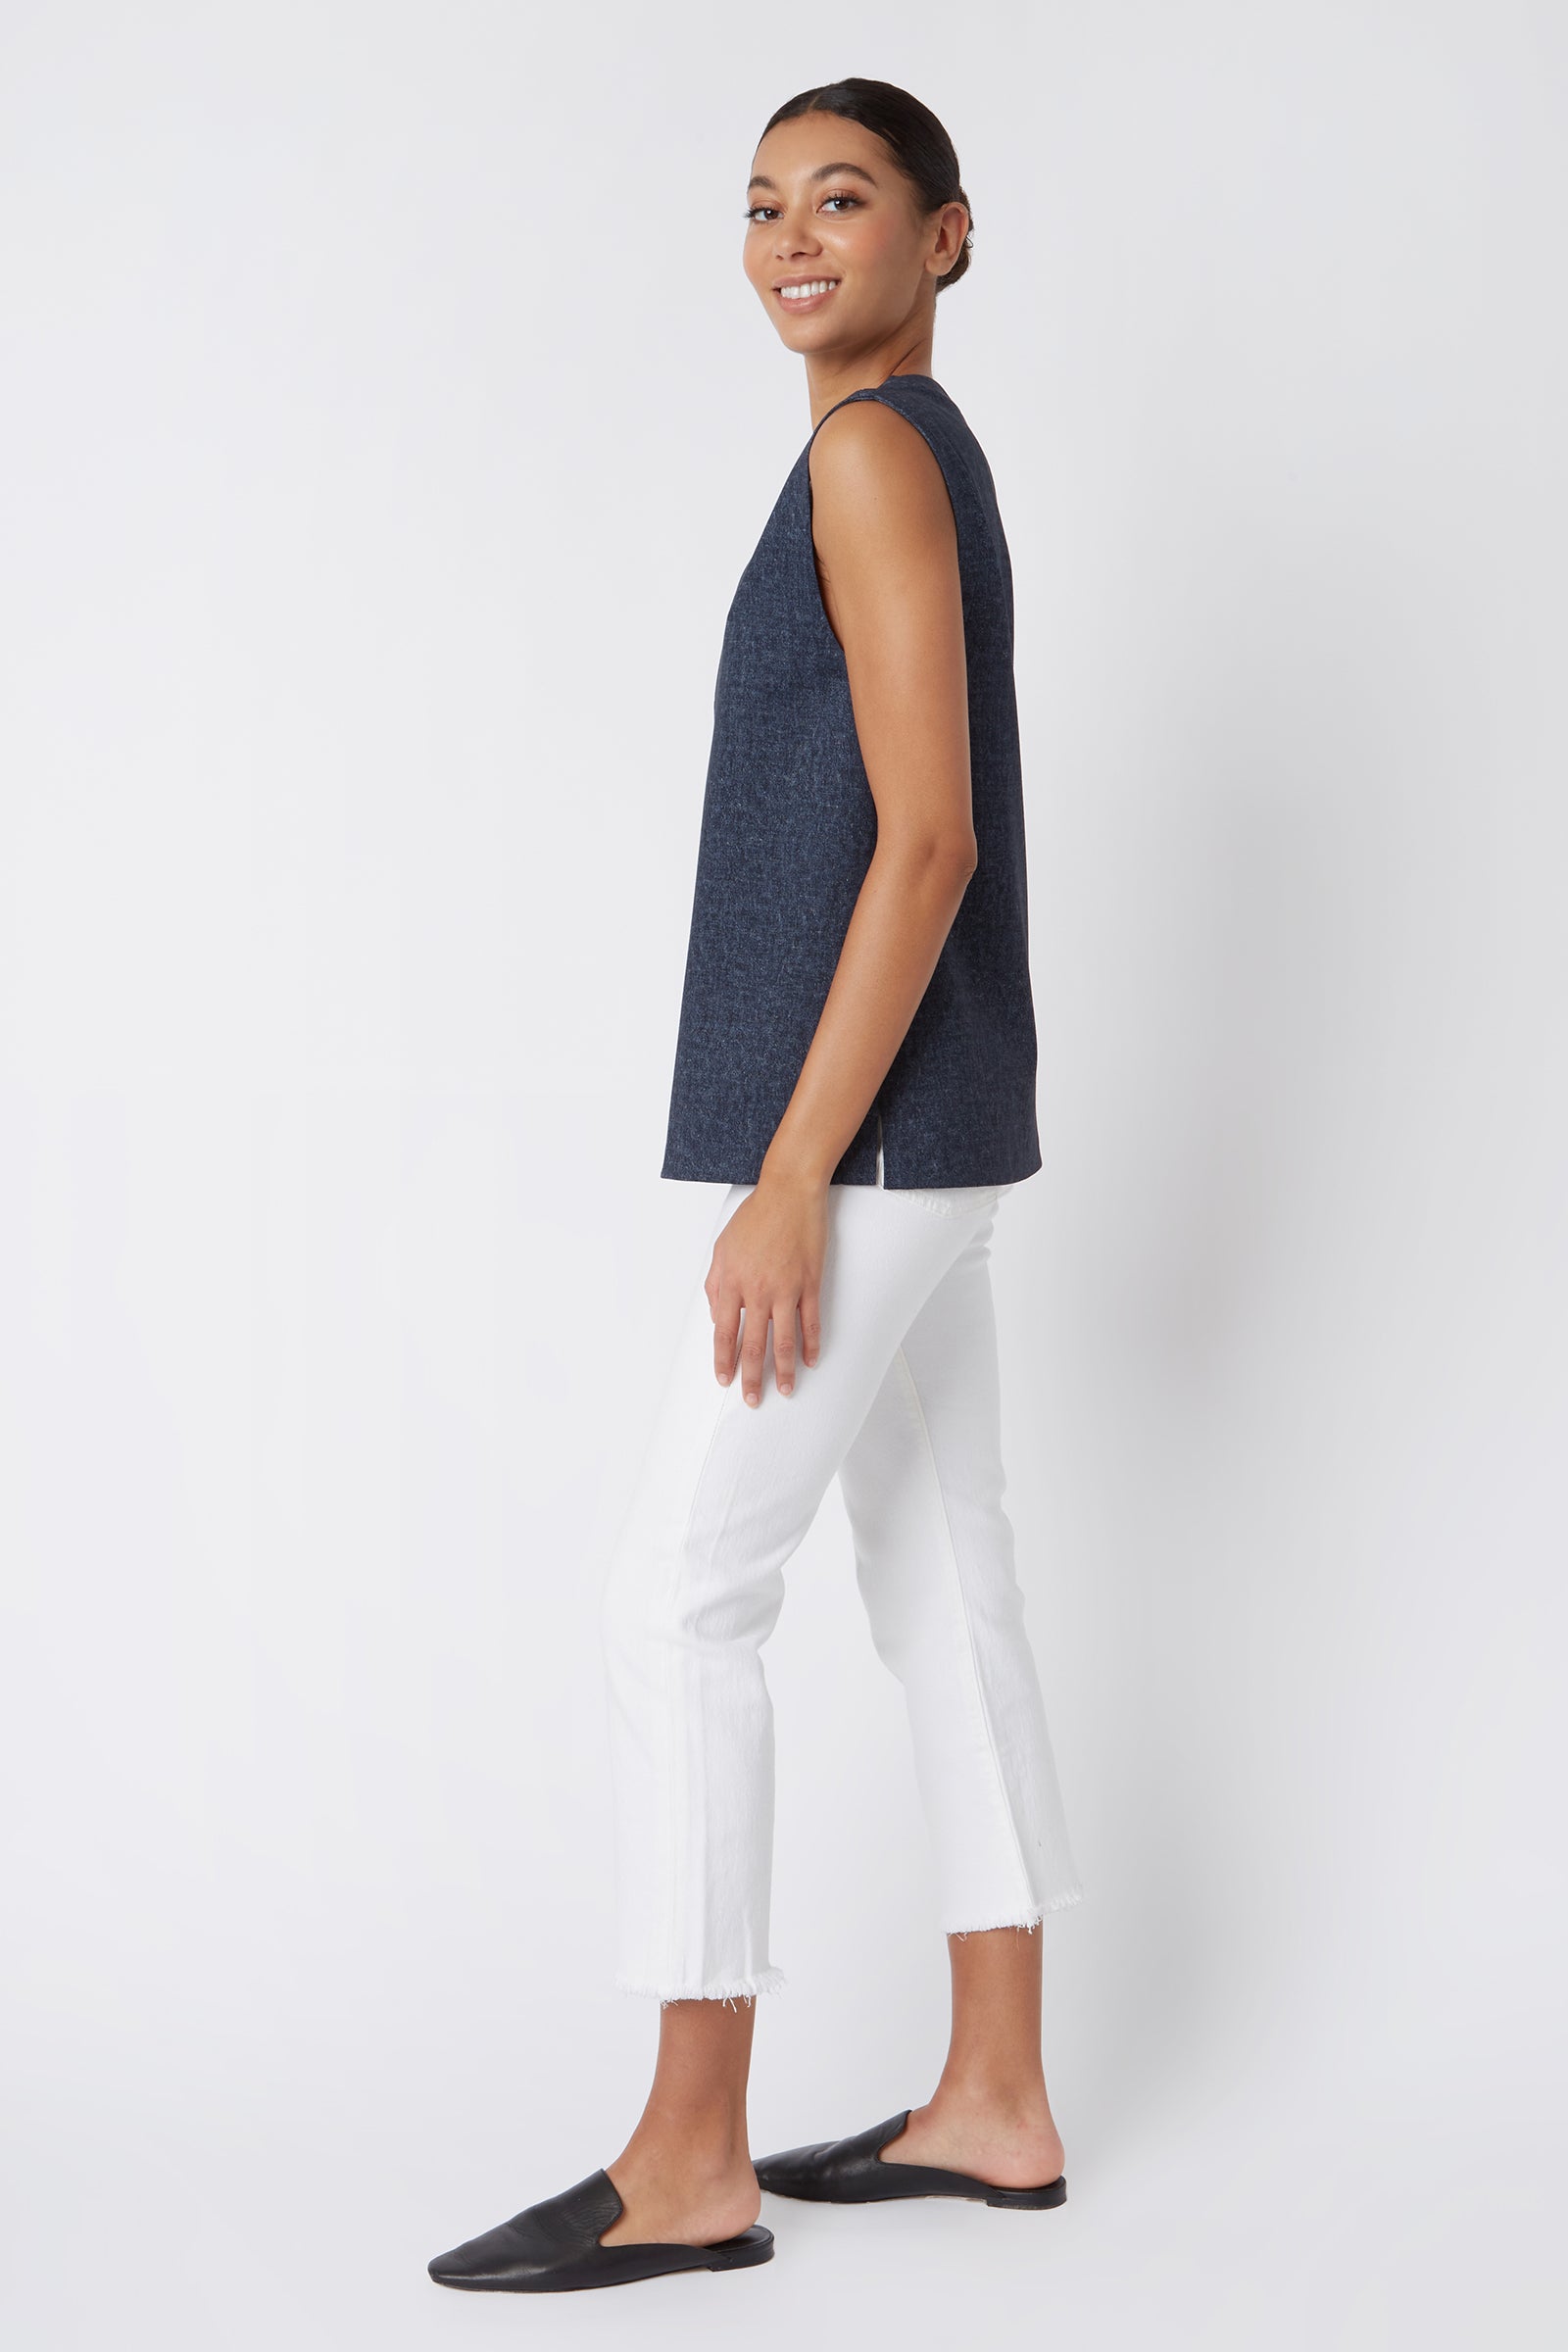 Kal Rieman Dustin Collared Vest in Navy Heather on Model Full Side View